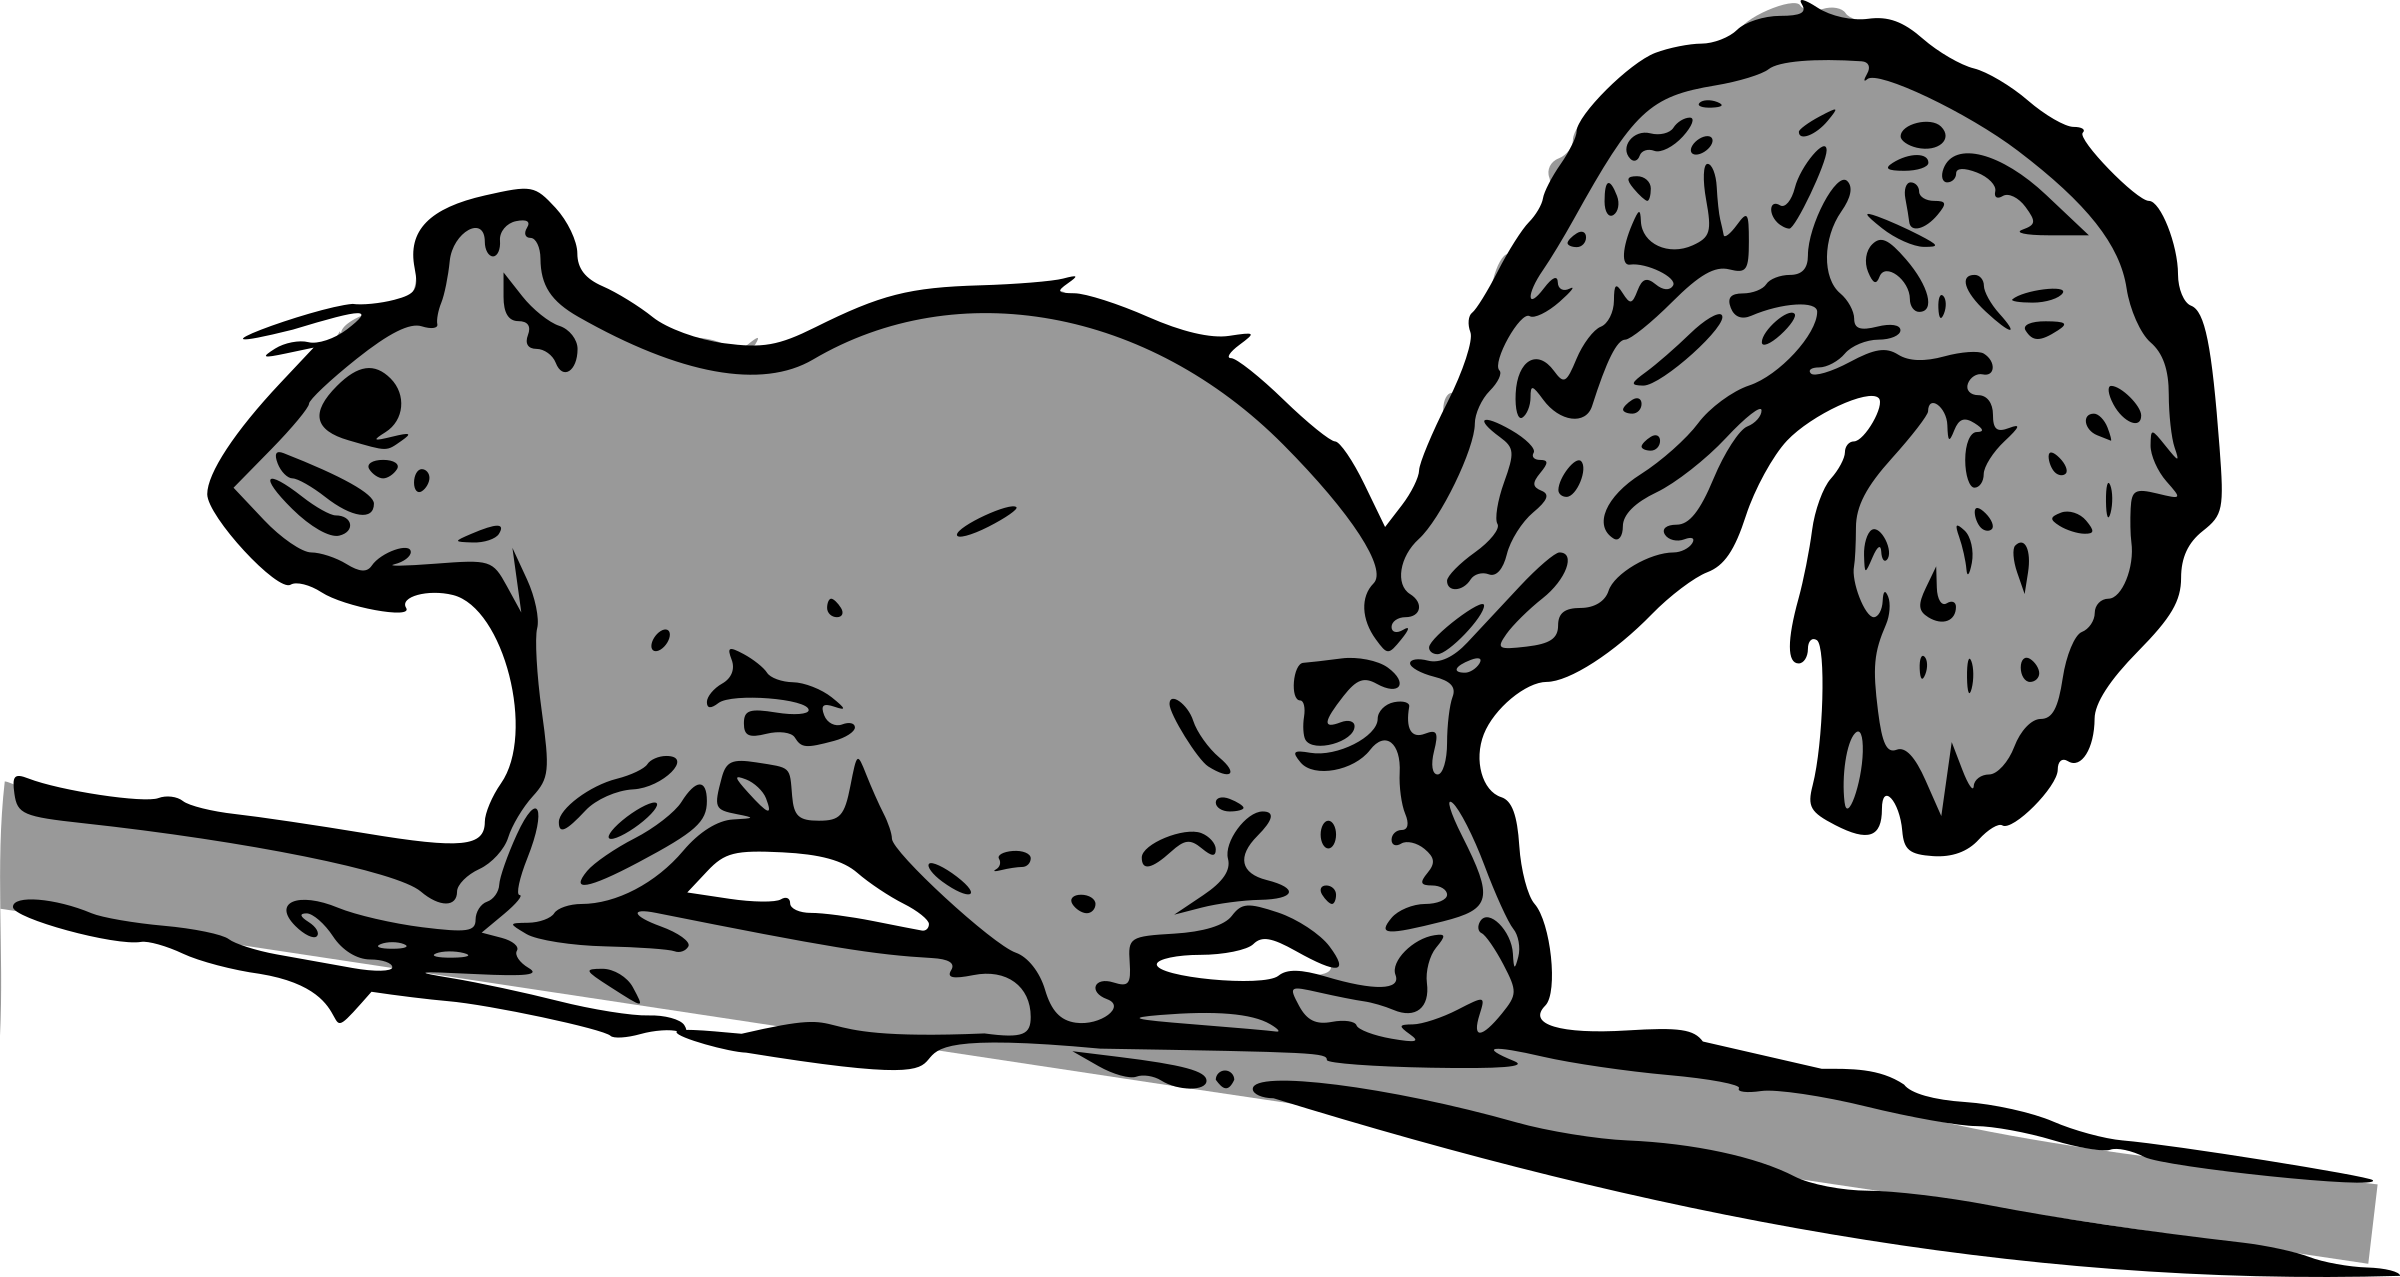 Squirrel - Cartoon Squirrel Running Up Tree - (2400x1277) Png Clipart  Download